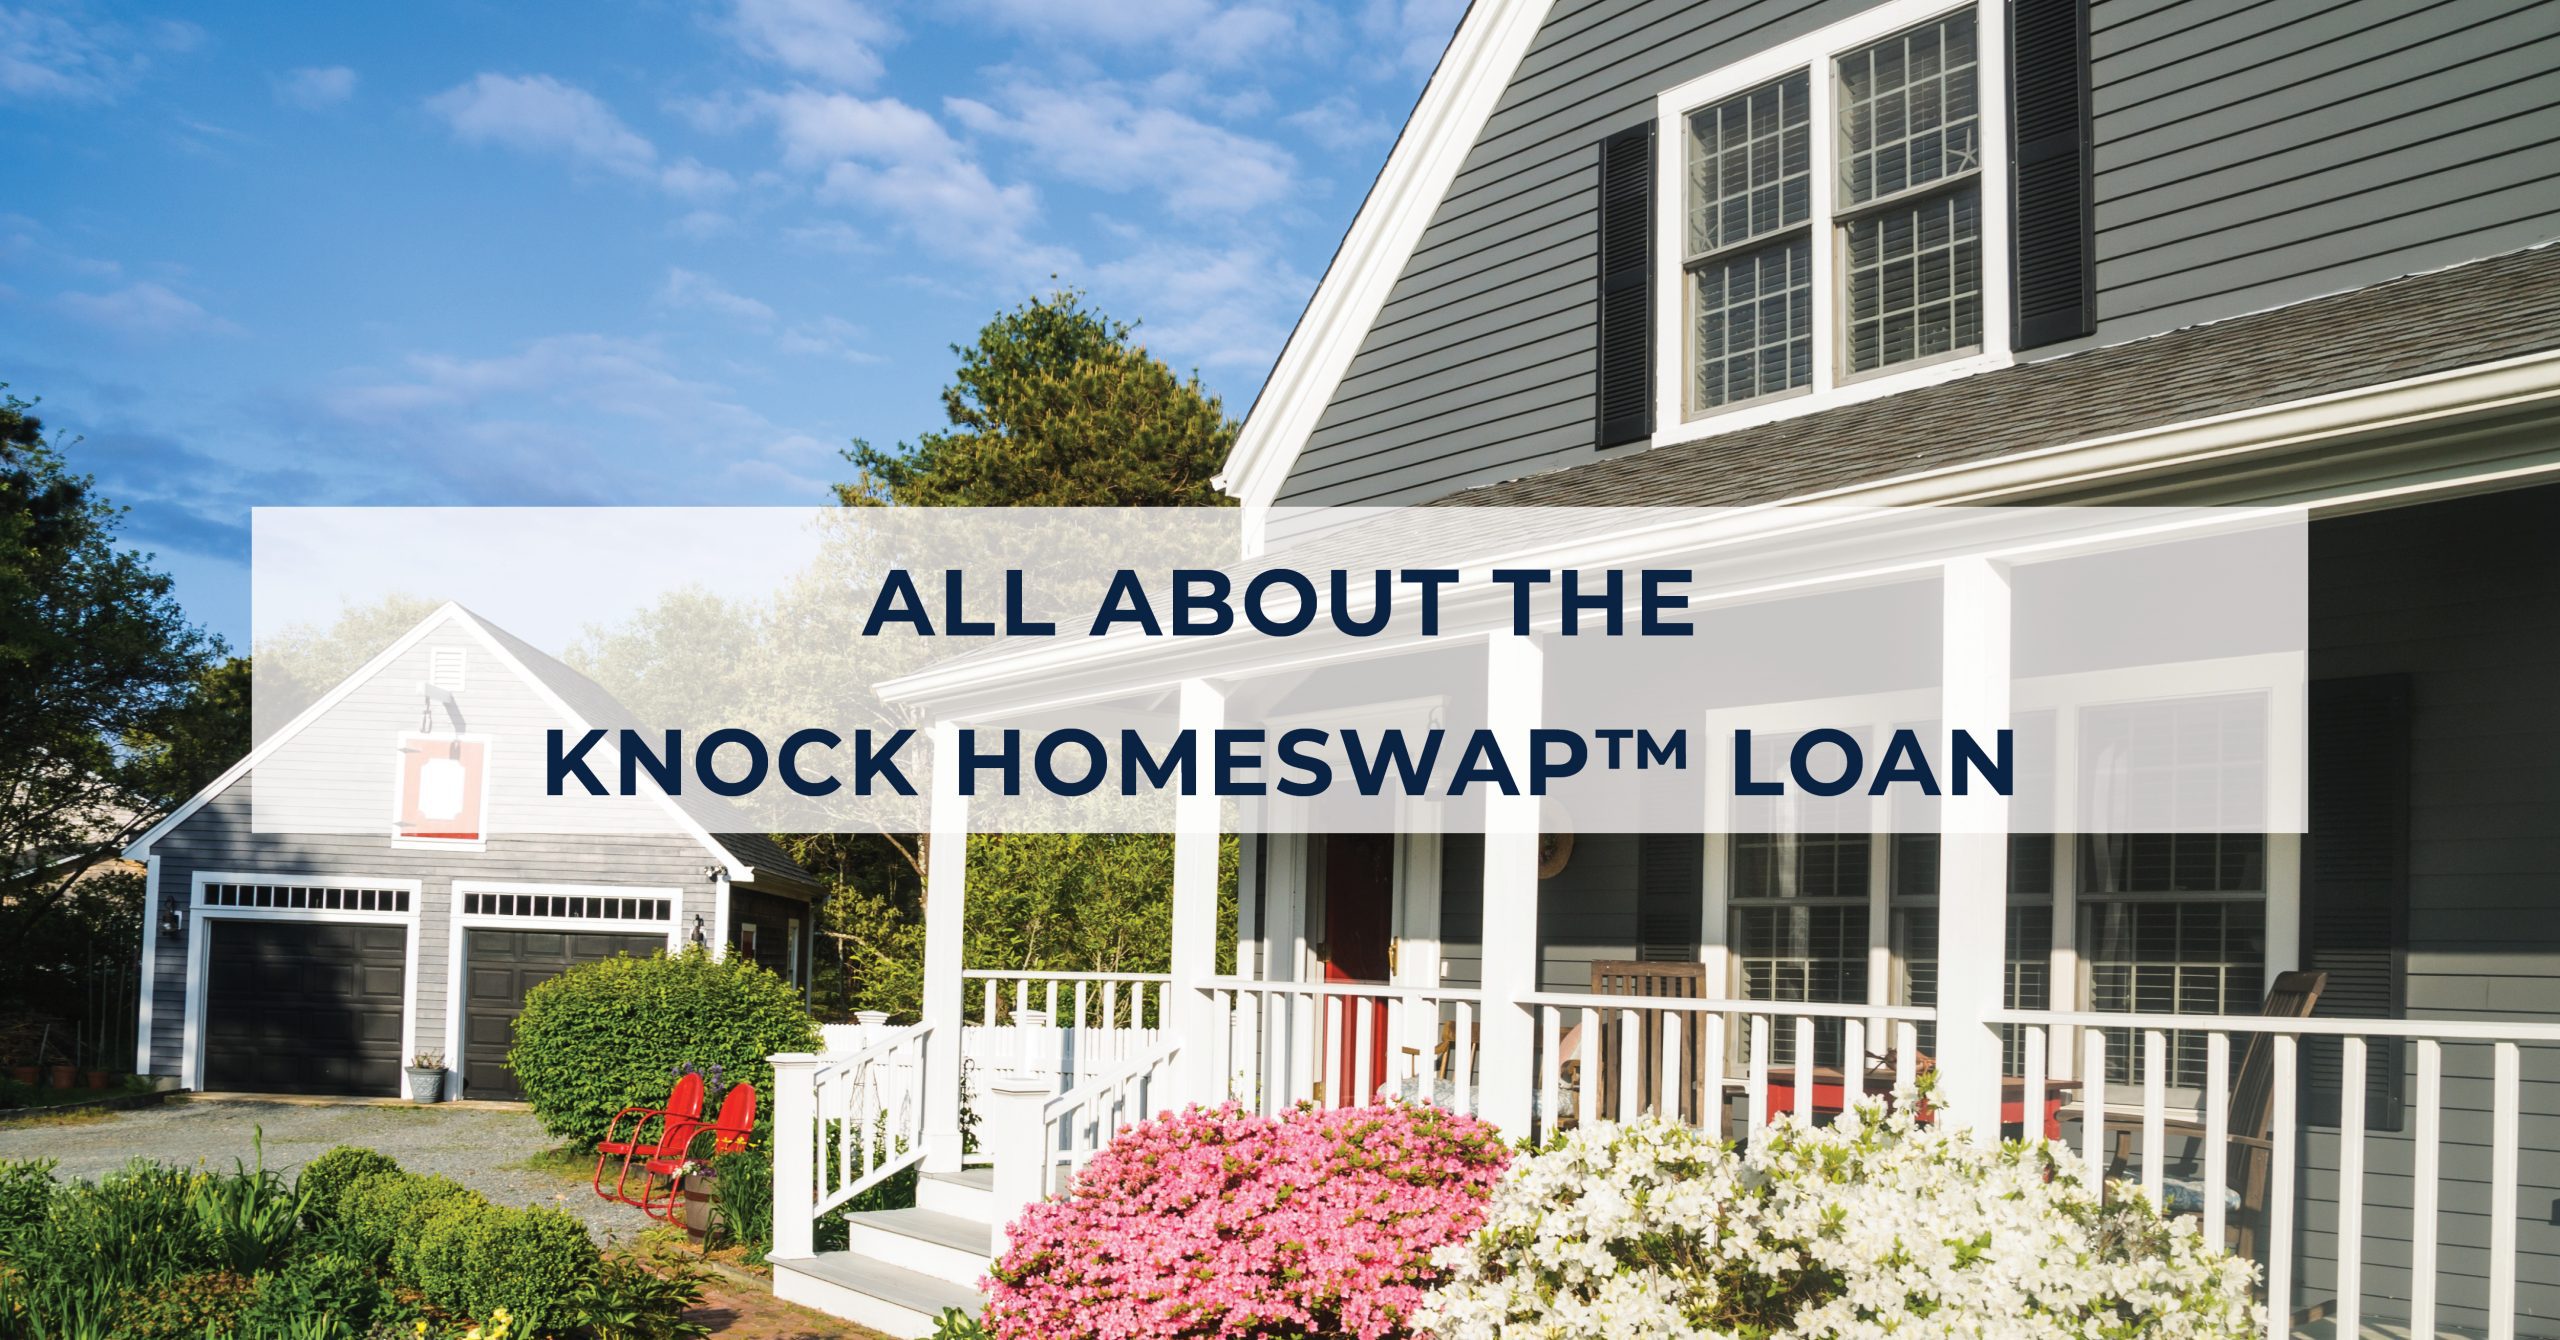 All About the Knock HomeSwap™ Loan